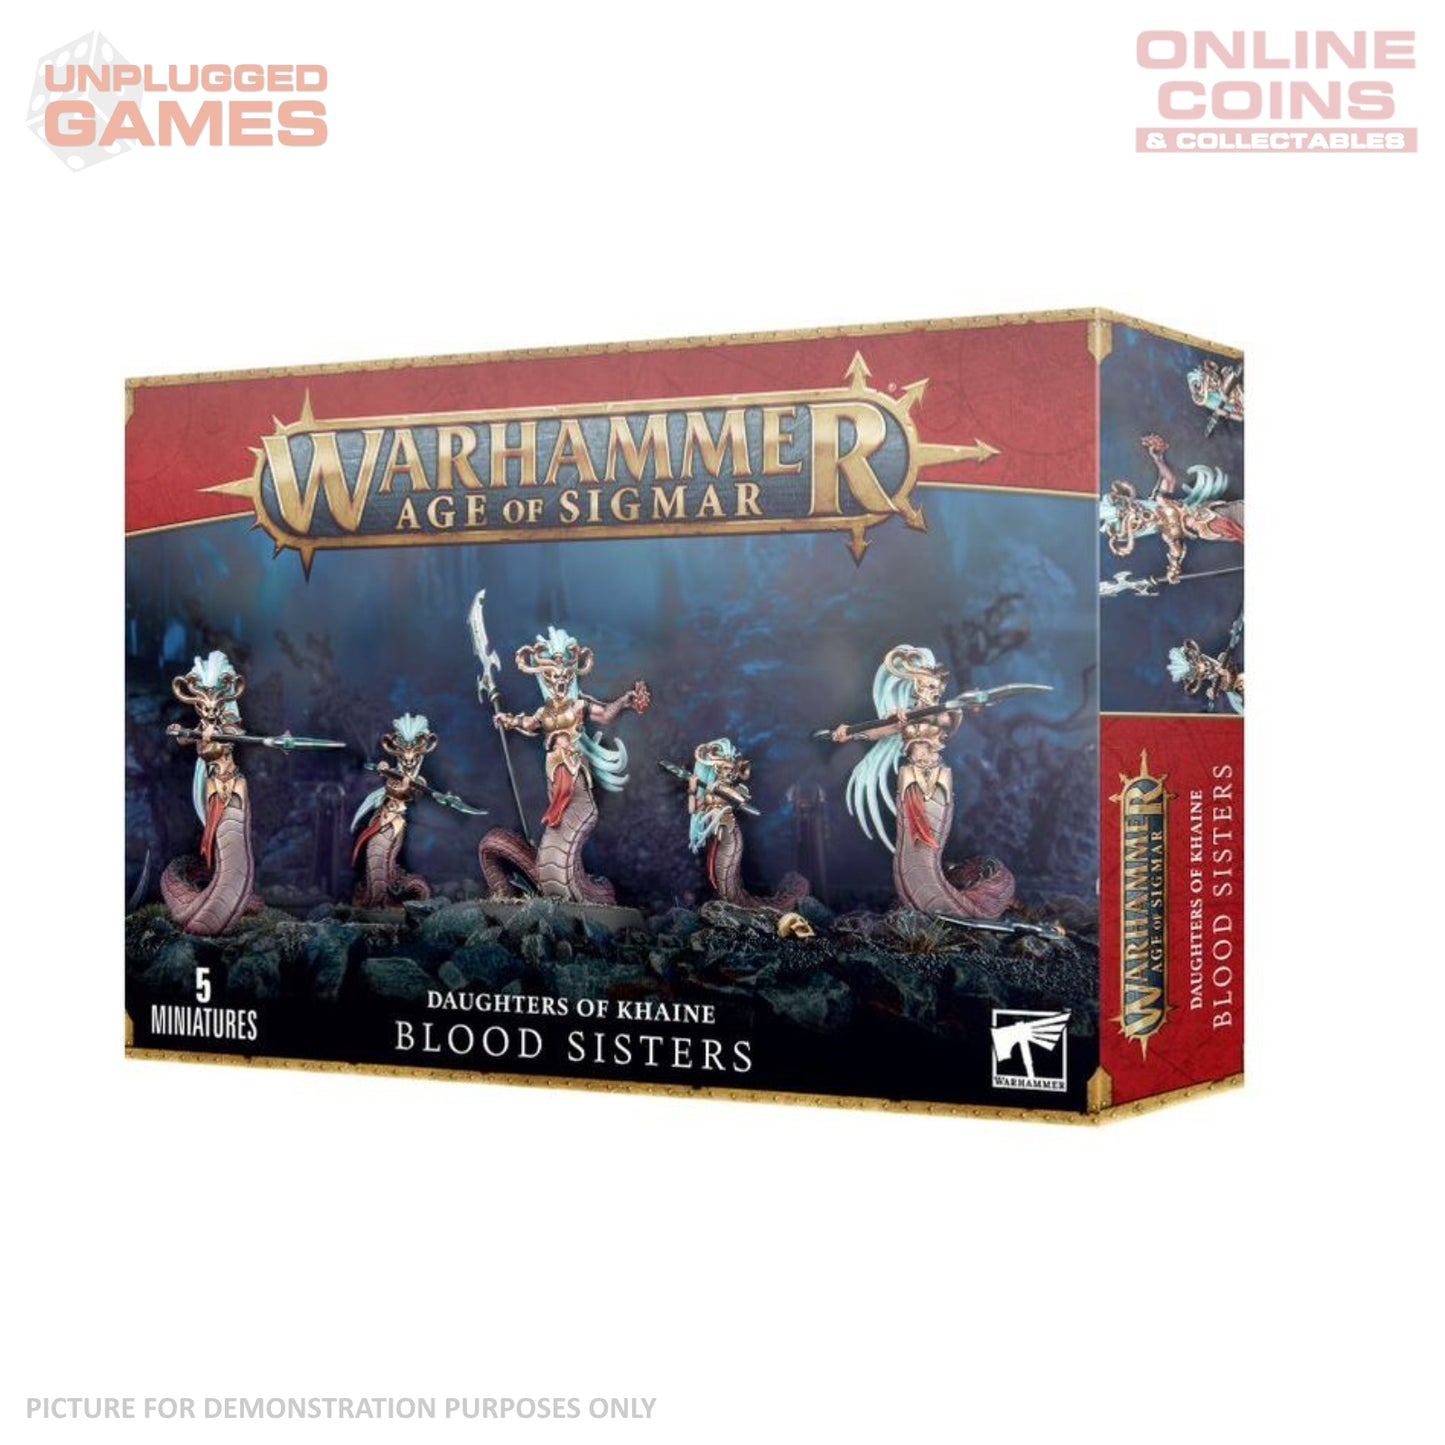 Warhammer Age of Sigmar - Daughters of Khaine Blood Sisters